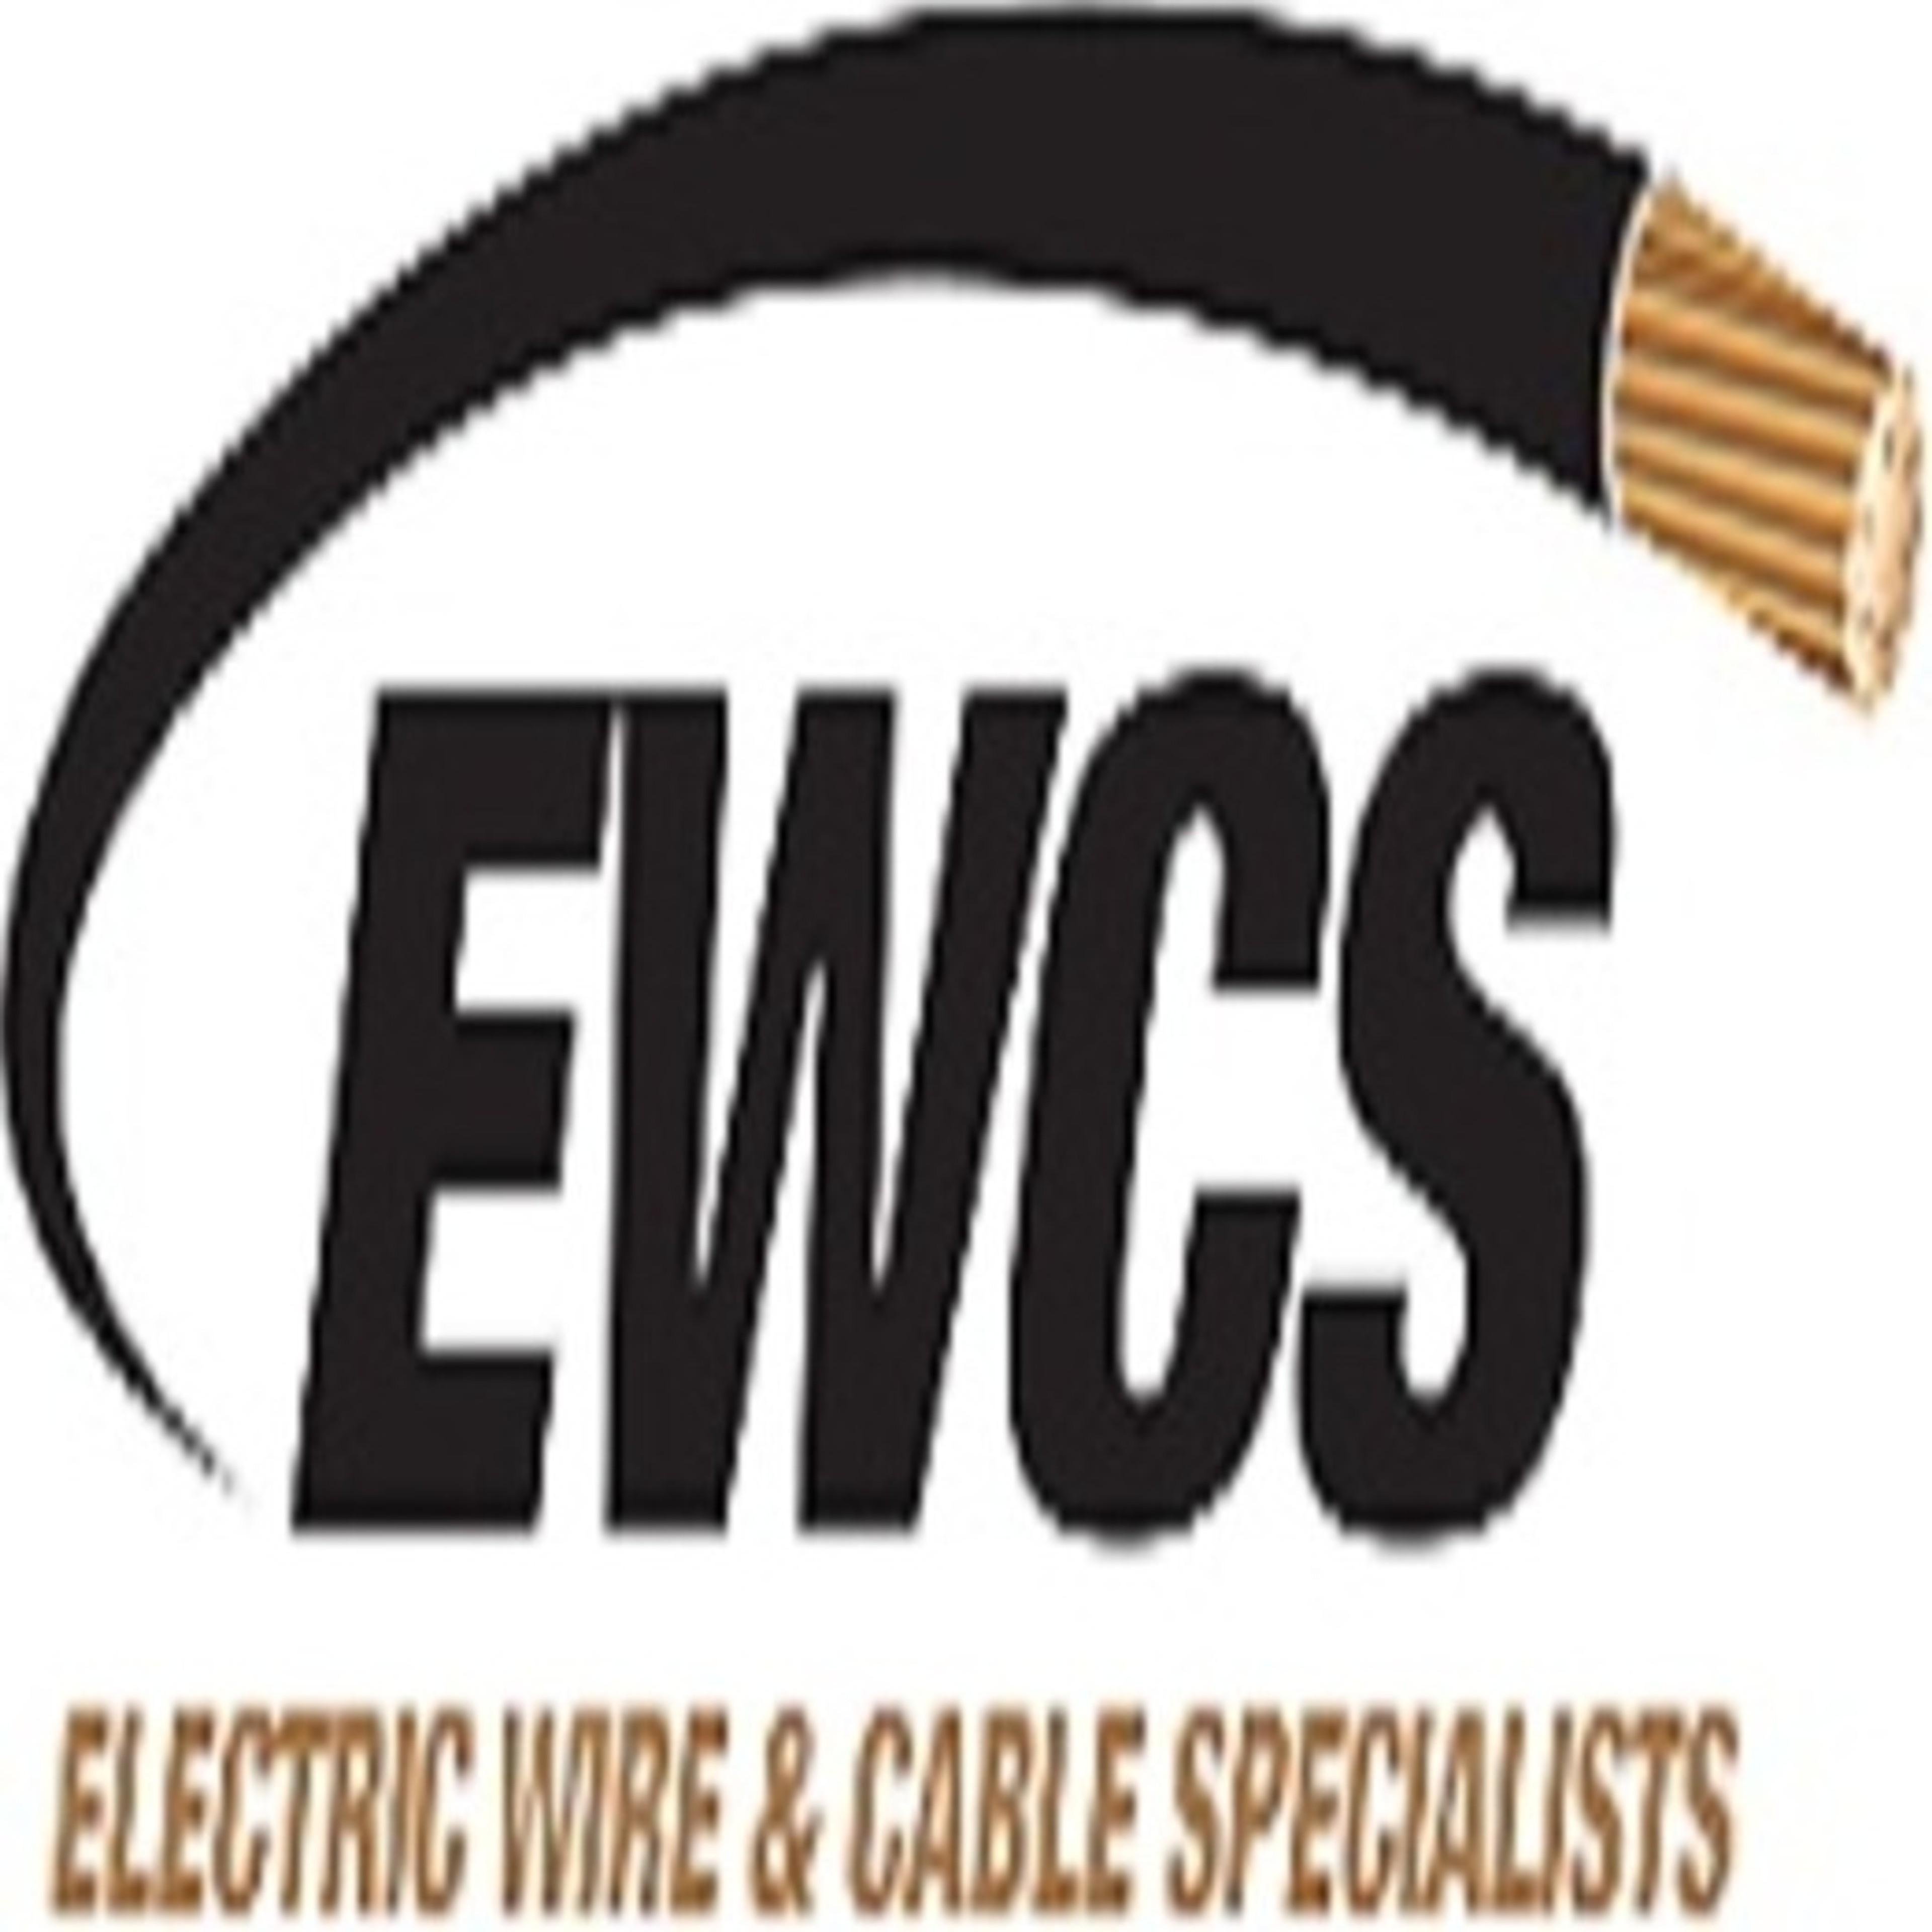 Electrical Wire & Cable Specialists